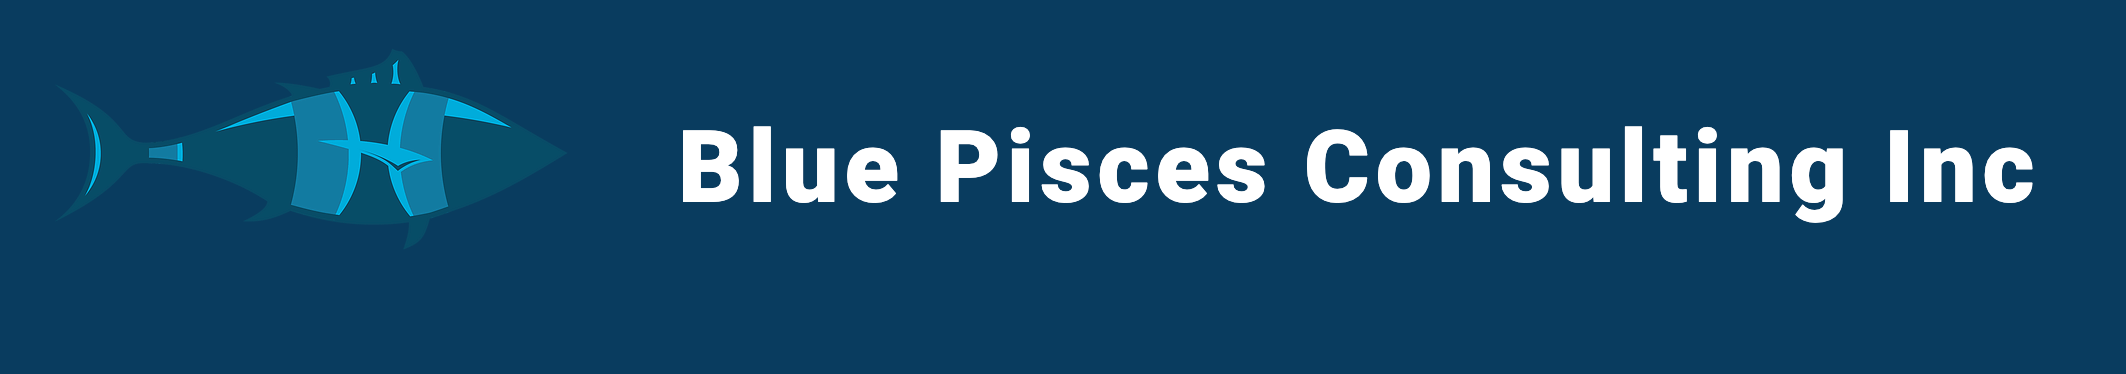 blue pisces consulting consulting firms los angeles